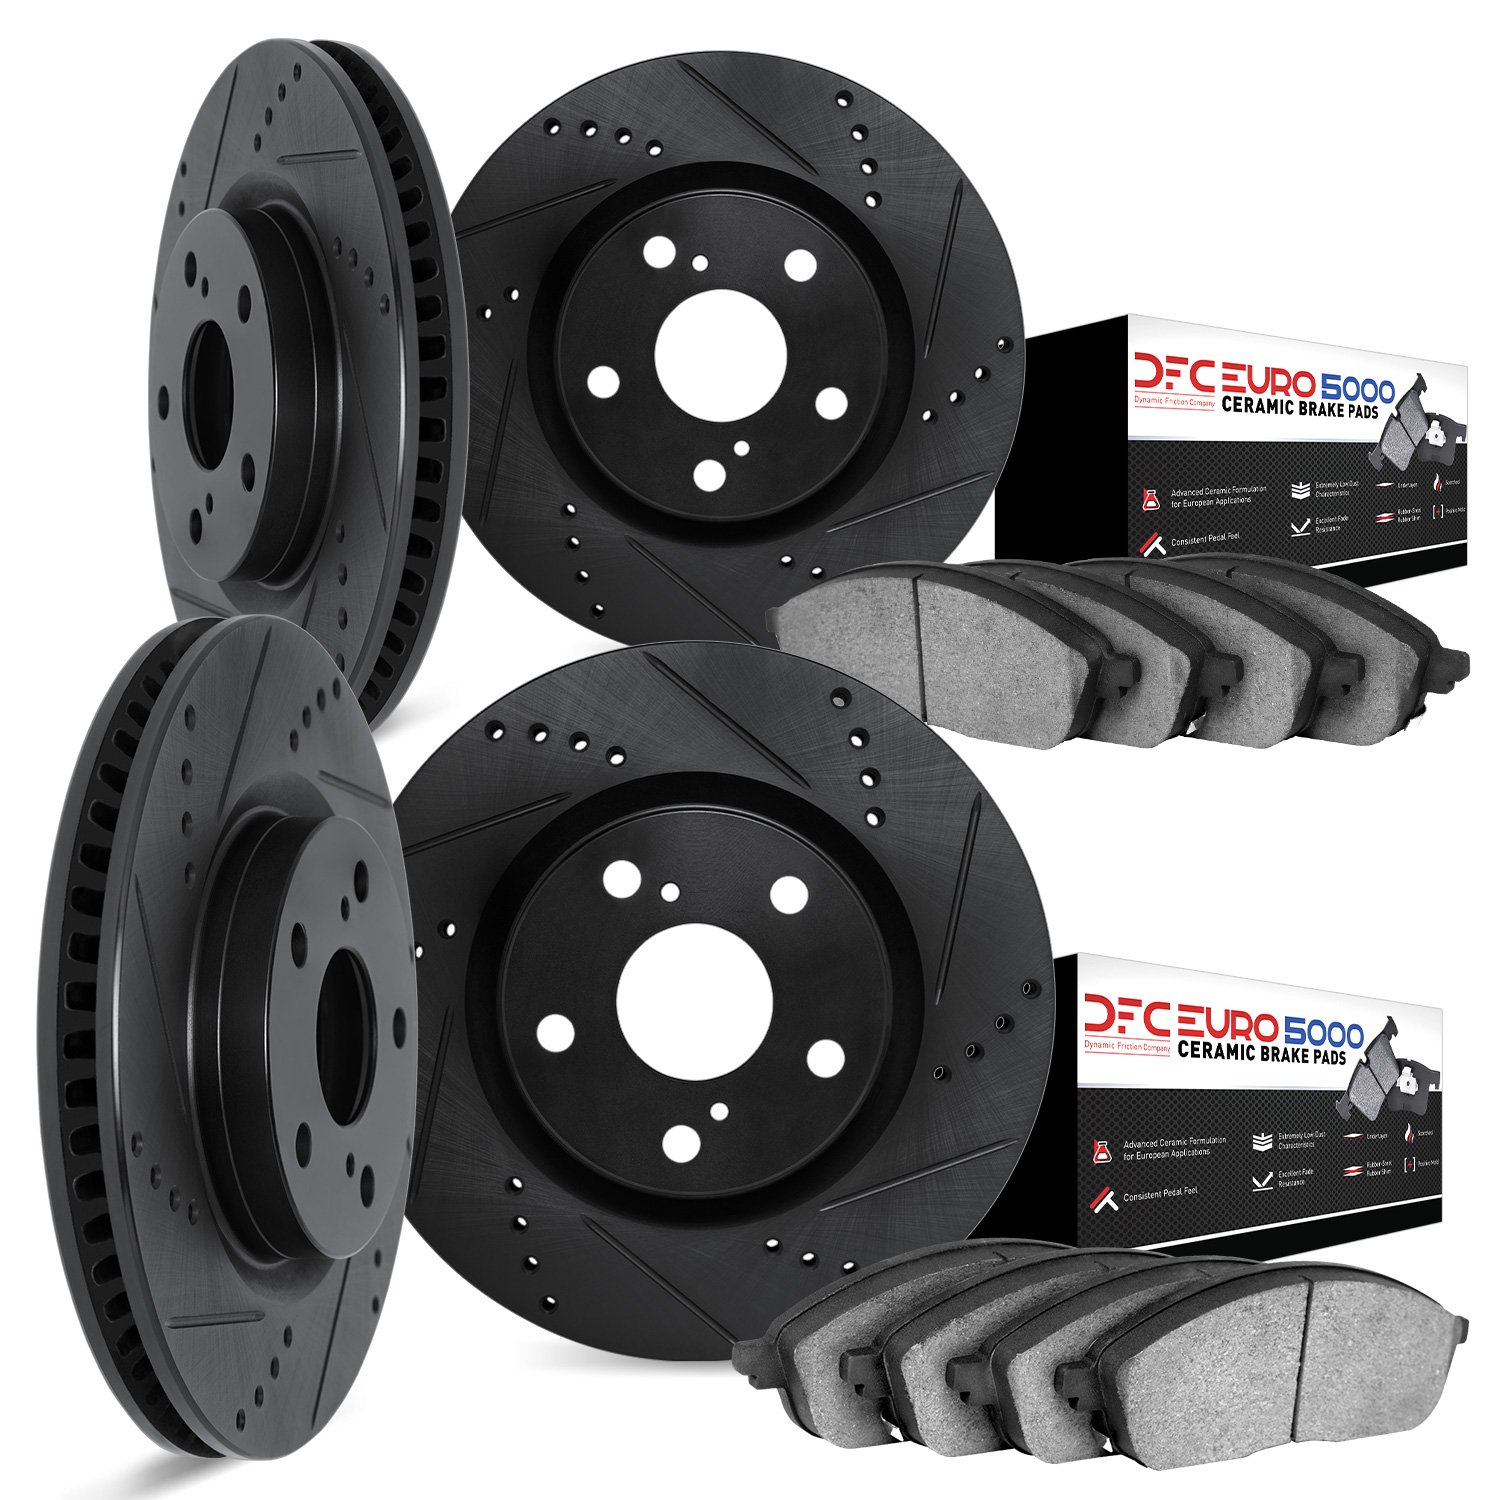 8604-11002 Drilled/Slotted Brake Rotors w/5000 Euro Ceramic Brake Pads Kit [Black], 2005-2009 Land Rover, Position: Front and Re